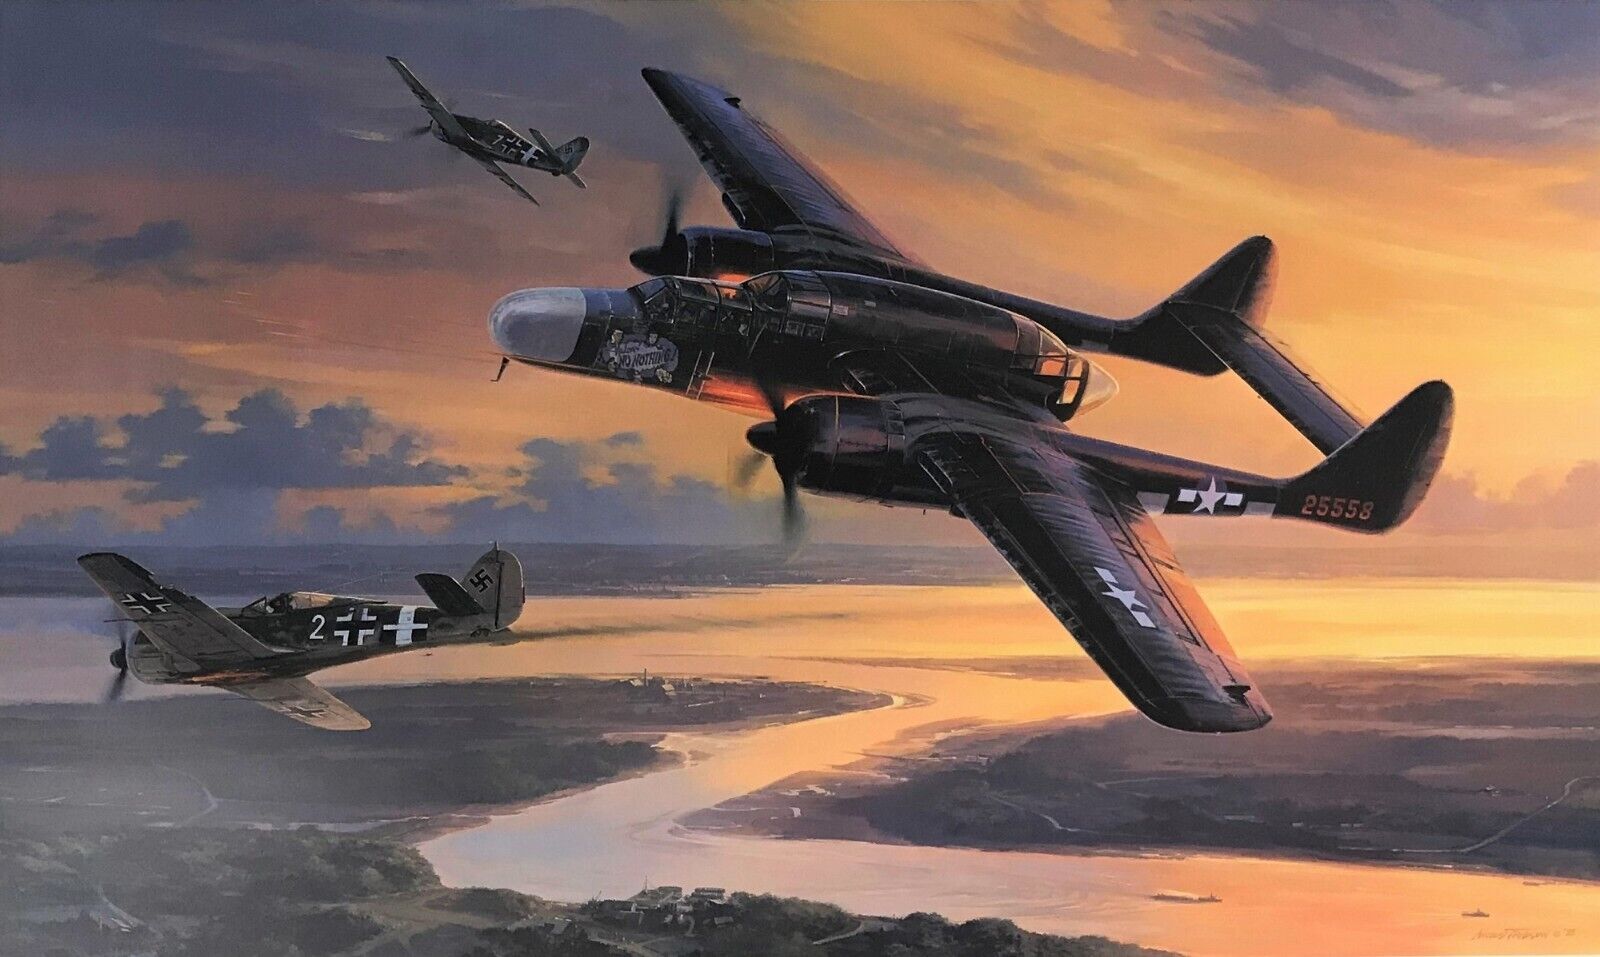 Twilight Conquest by Nicolas Trudgian art autographed by P-61 Black Widow Pilots